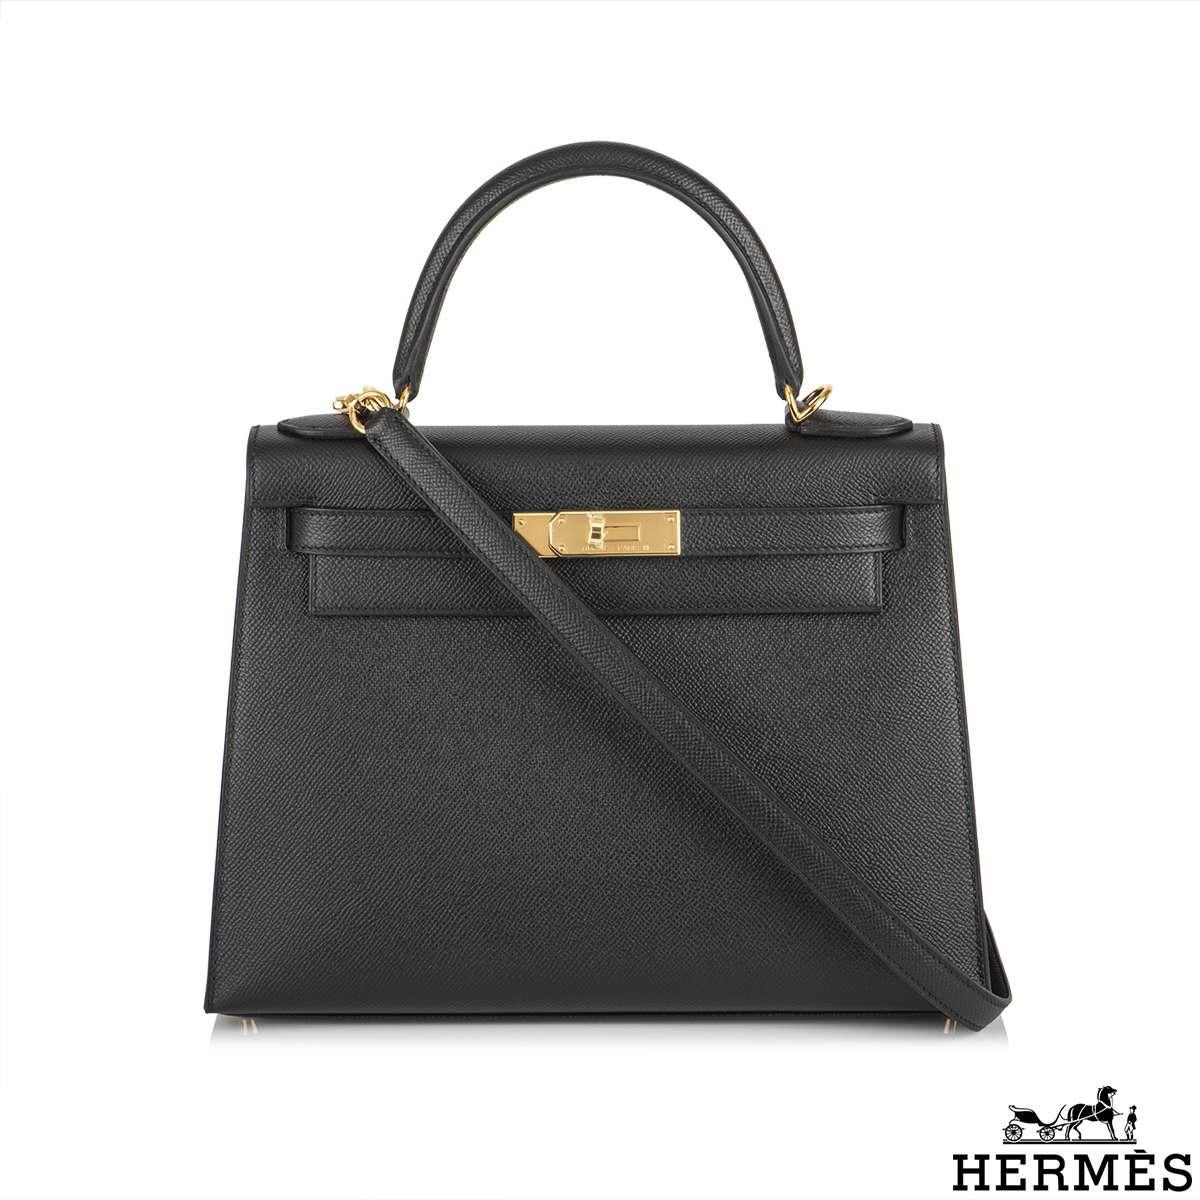 An exquisite Hermès 28cm Kelly bag. The exterior of this Kelly features a sellier style in noir black epsom leather. The noir epsom leather is complemented with gold hardware and tonal stitchings. It features a front toggle closure with two straps,